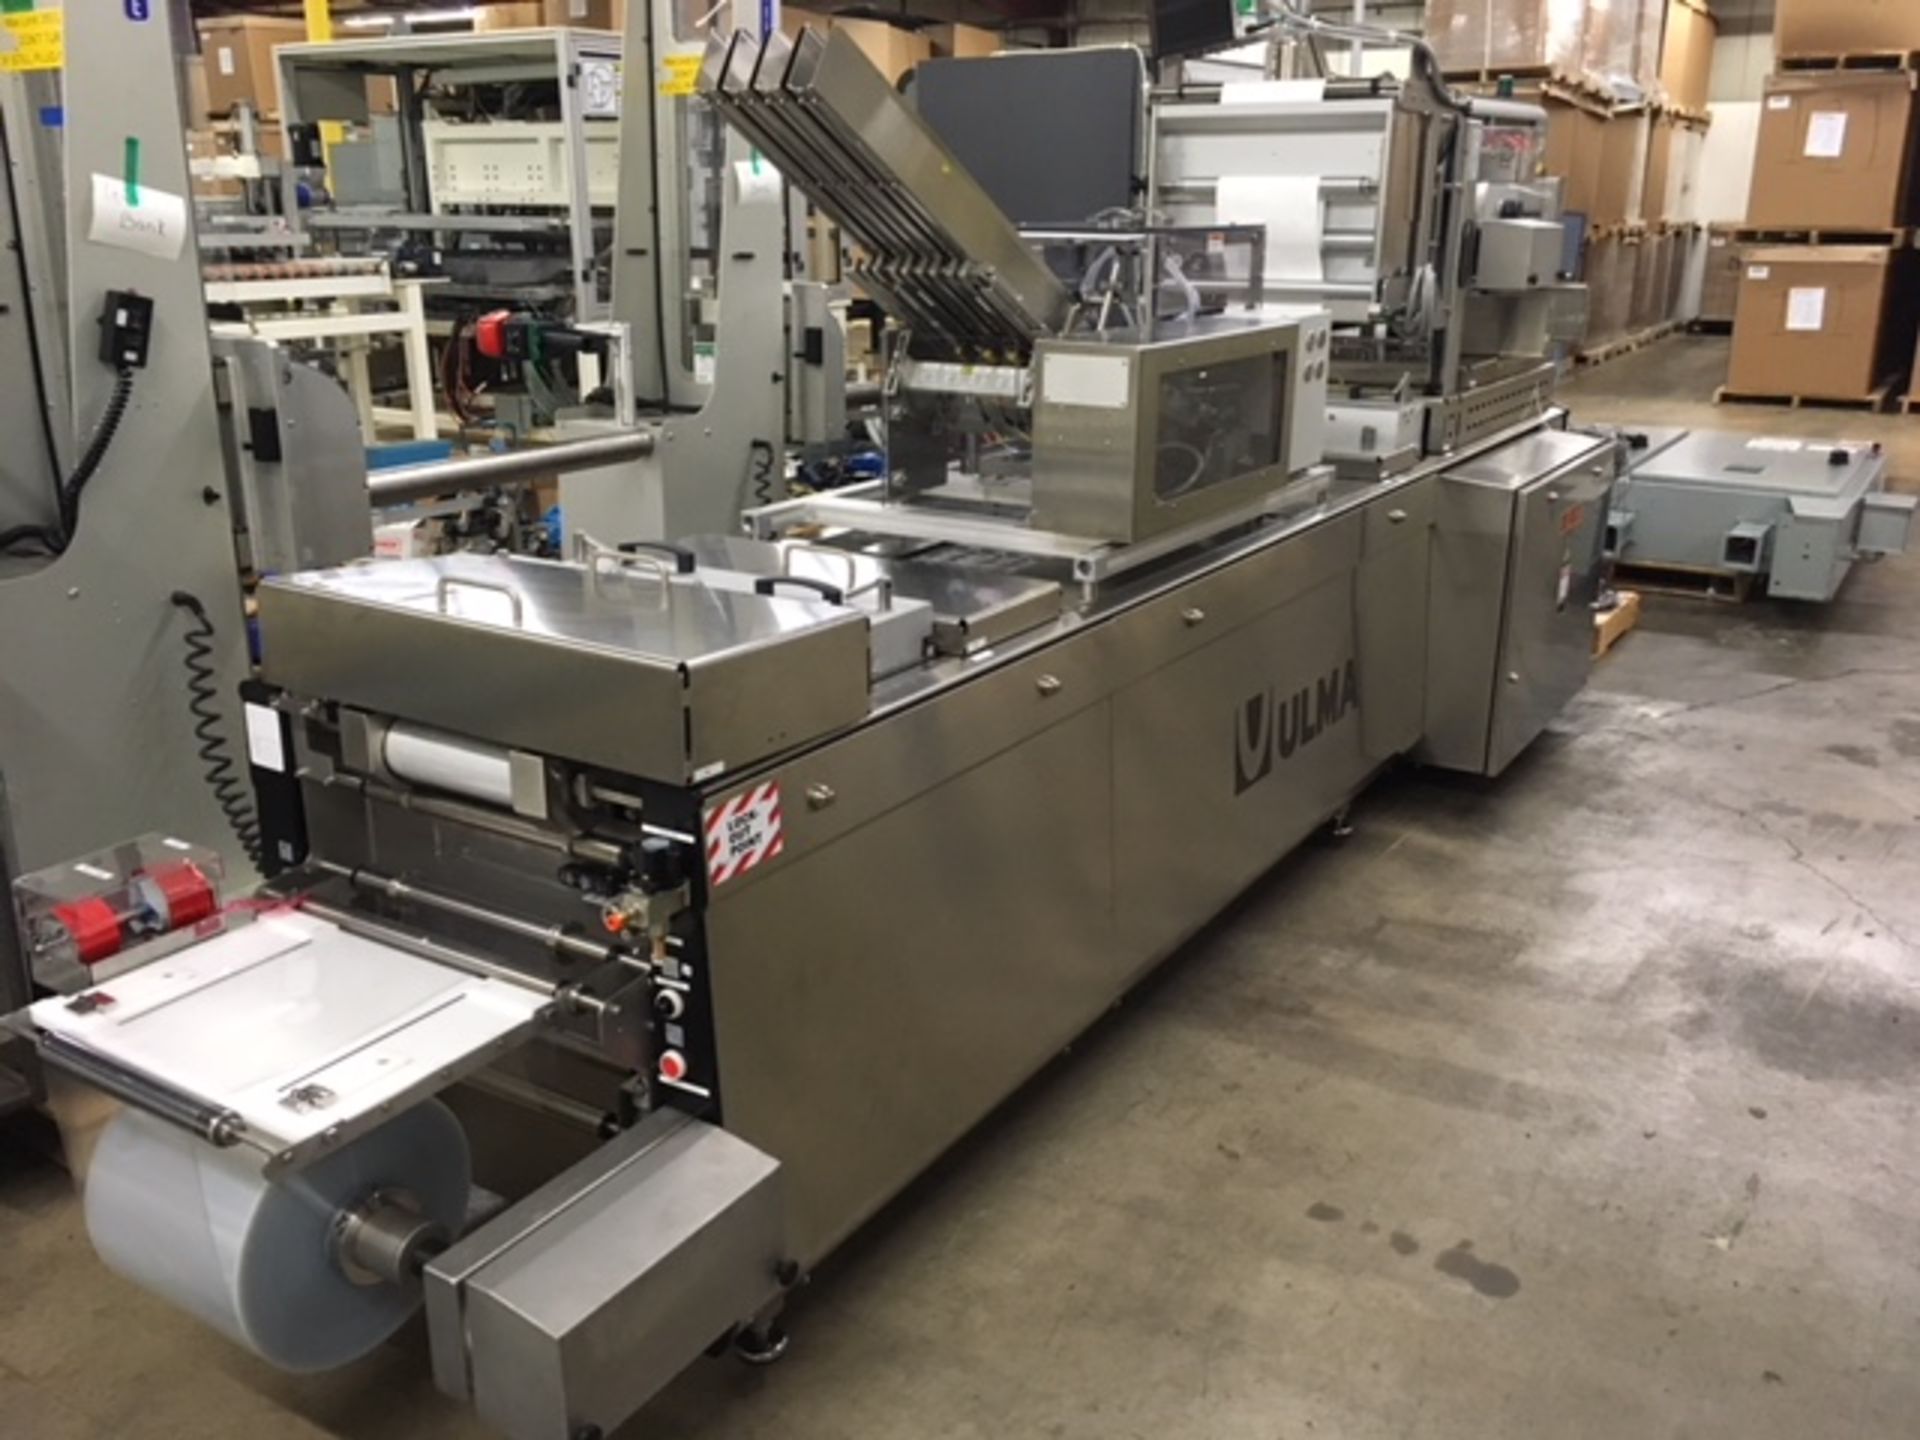 Like New 2013 Ulma-Harpak TFS400 Roll Stock Thermoforming Packaging Machine | Elkton MD - Rig: $1000 - Image 2 of 6